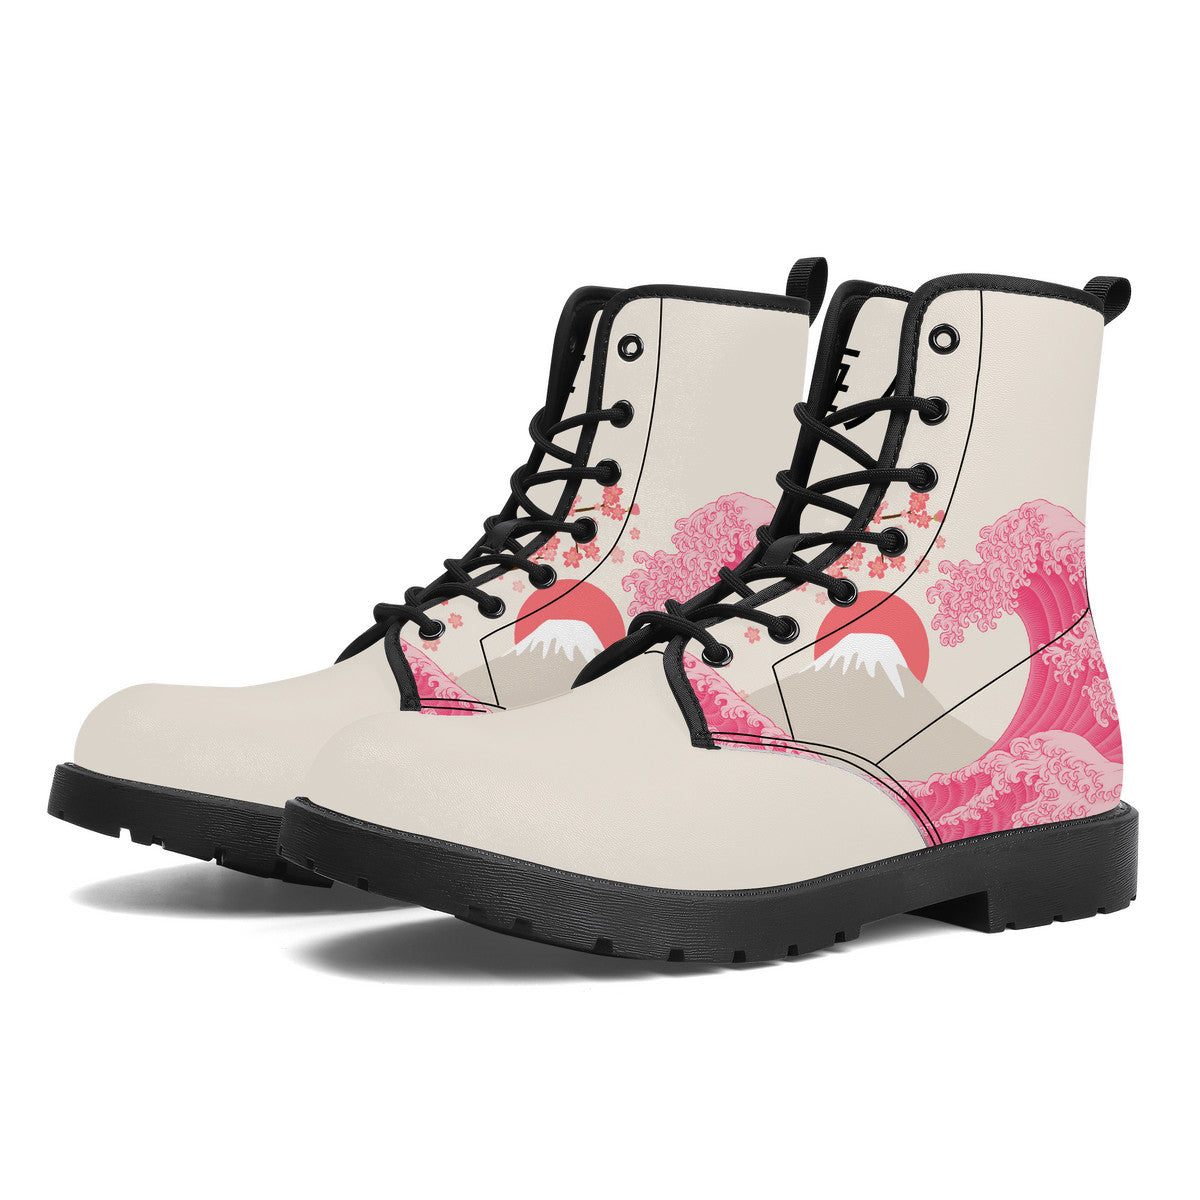 The Pink Great Wave Vegan Leather Boots